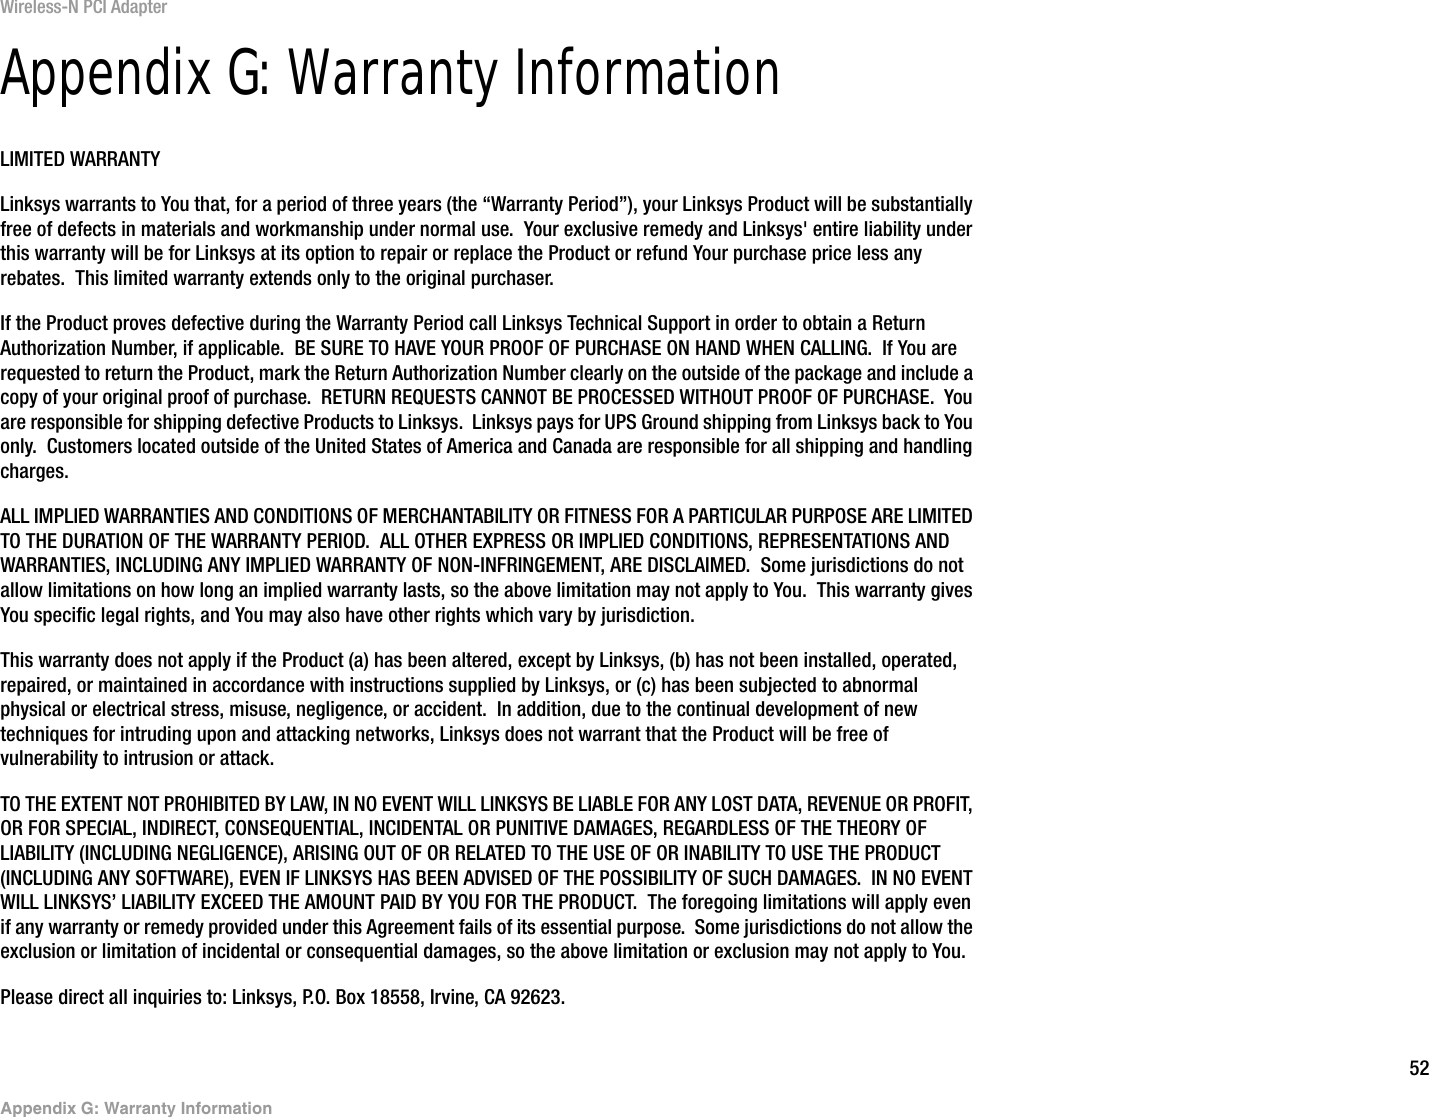 52Appendix G: Warranty InformationWireless-N PCI AdapterAppendix G: Warranty InformationLIMITED WARRANTYLinksys warrants to You that, for a period of three years (the “Warranty Period”), your Linksys Product will be substantially free of defects in materials and workmanship under normal use.  Your exclusive remedy and Linksys&apos; entire liability under this warranty will be for Linksys at its option to repair or replace the Product or refund Your purchase price less any rebates.  This limited warranty extends only to the original purchaser.  If the Product proves defective during the Warranty Period call Linksys Technical Support in order to obtain a Return Authorization Number, if applicable.  BE SURE TO HAVE YOUR PROOF OF PURCHASE ON HAND WHEN CALLING.  If You are requested to return the Product, mark the Return Authorization Number clearly on the outside of the package and include a copy of your original proof of purchase.  RETURN REQUESTS CANNOT BE PROCESSED WITHOUT PROOF OF PURCHASE.  You are responsible for shipping defective Products to Linksys.  Linksys pays for UPS Ground shipping from Linksys back to You only.  Customers located outside of the United States of America and Canada are responsible for all shipping and handling charges. ALL IMPLIED WARRANTIES AND CONDITIONS OF MERCHANTABILITY OR FITNESS FOR A PARTICULAR PURPOSE ARE LIMITED TO THE DURATION OF THE WARRANTY PERIOD.  ALL OTHER EXPRESS OR IMPLIED CONDITIONS, REPRESENTATIONS AND WARRANTIES, INCLUDING ANY IMPLIED WARRANTY OF NON-INFRINGEMENT, ARE DISCLAIMED.  Some jurisdictions do not allow limitations on how long an implied warranty lasts, so the above limitation may not apply to You.  This warranty gives You specific legal rights, and You may also have other rights which vary by jurisdiction.This warranty does not apply if the Product (a) has been altered, except by Linksys, (b) has not been installed, operated, repaired, or maintained in accordance with instructions supplied by Linksys, or (c) has been subjected to abnormal physical or electrical stress, misuse, negligence, or accident.  In addition, due to the continual development of new techniques for intruding upon and attacking networks, Linksys does not warrant that the Product will be free of vulnerability to intrusion or attack.TO THE EXTENT NOT PROHIBITED BY LAW, IN NO EVENT WILL LINKSYS BE LIABLE FOR ANY LOST DATA, REVENUE OR PROFIT, OR FOR SPECIAL, INDIRECT, CONSEQUENTIAL, INCIDENTAL OR PUNITIVE DAMAGES, REGARDLESS OF THE THEORY OF LIABILITY (INCLUDING NEGLIGENCE), ARISING OUT OF OR RELATED TO THE USE OF OR INABILITY TO USE THE PRODUCT (INCLUDING ANY SOFTWARE), EVEN IF LINKSYS HAS BEEN ADVISED OF THE POSSIBILITY OF SUCH DAMAGES.  IN NO EVENT WILL LINKSYS’ LIABILITY EXCEED THE AMOUNT PAID BY YOU FOR THE PRODUCT.  The foregoing limitations will apply even if any warranty or remedy provided under this Agreement fails of its essential purpose.  Some jurisdictions do not allow the exclusion or limitation of incidental or consequential damages, so the above limitation or exclusion may not apply to You.Please direct all inquiries to: Linksys, P.O. Box 18558, Irvine, CA 92623.